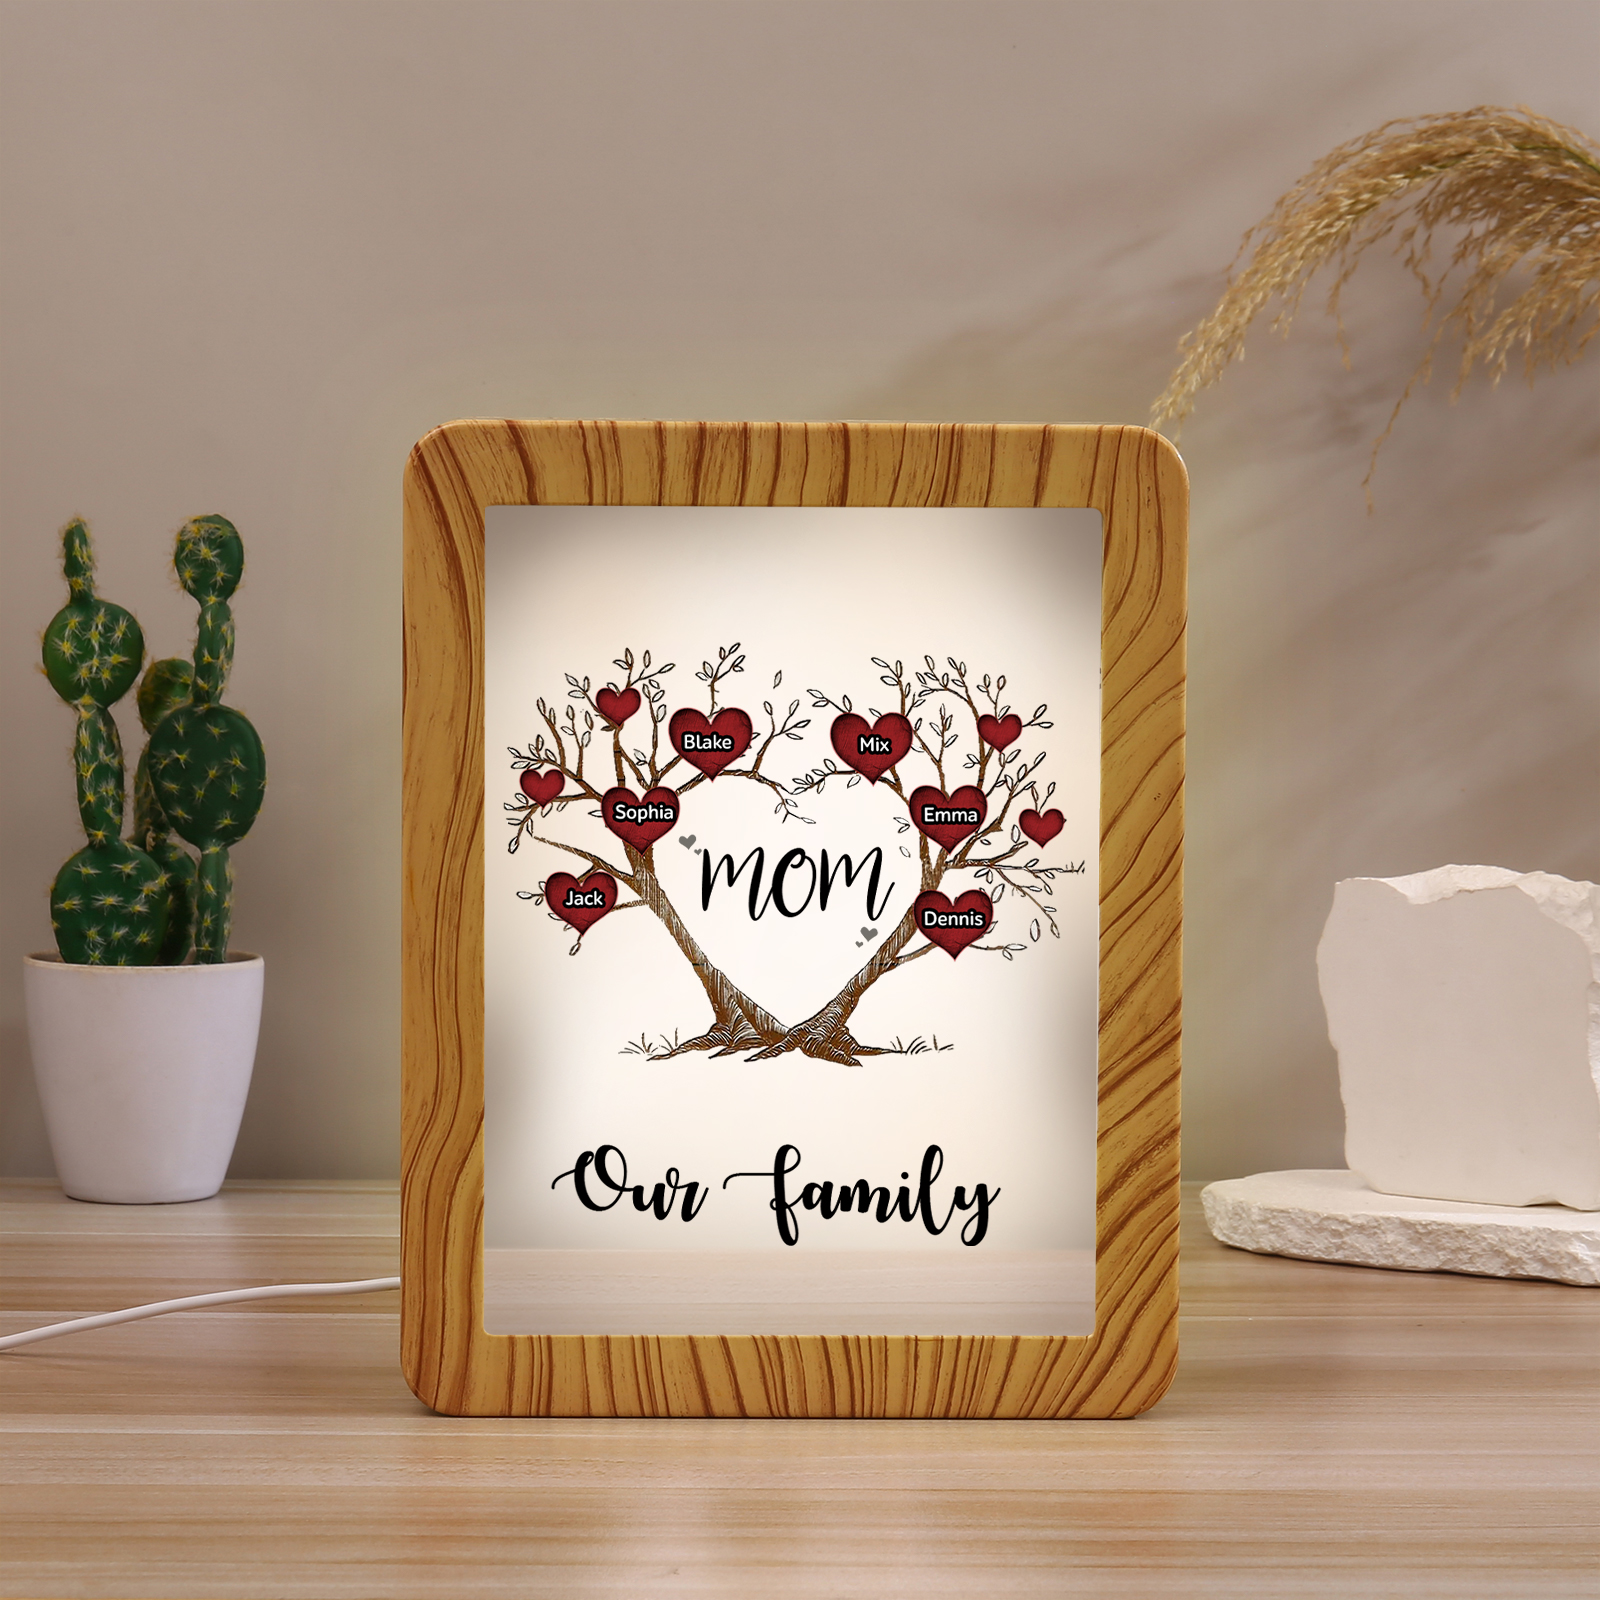 6 Names - Personalized Home Mirror Photo Frame Night Light Insert/Rechargeable Custom Text LED Night Light Gift for Mom